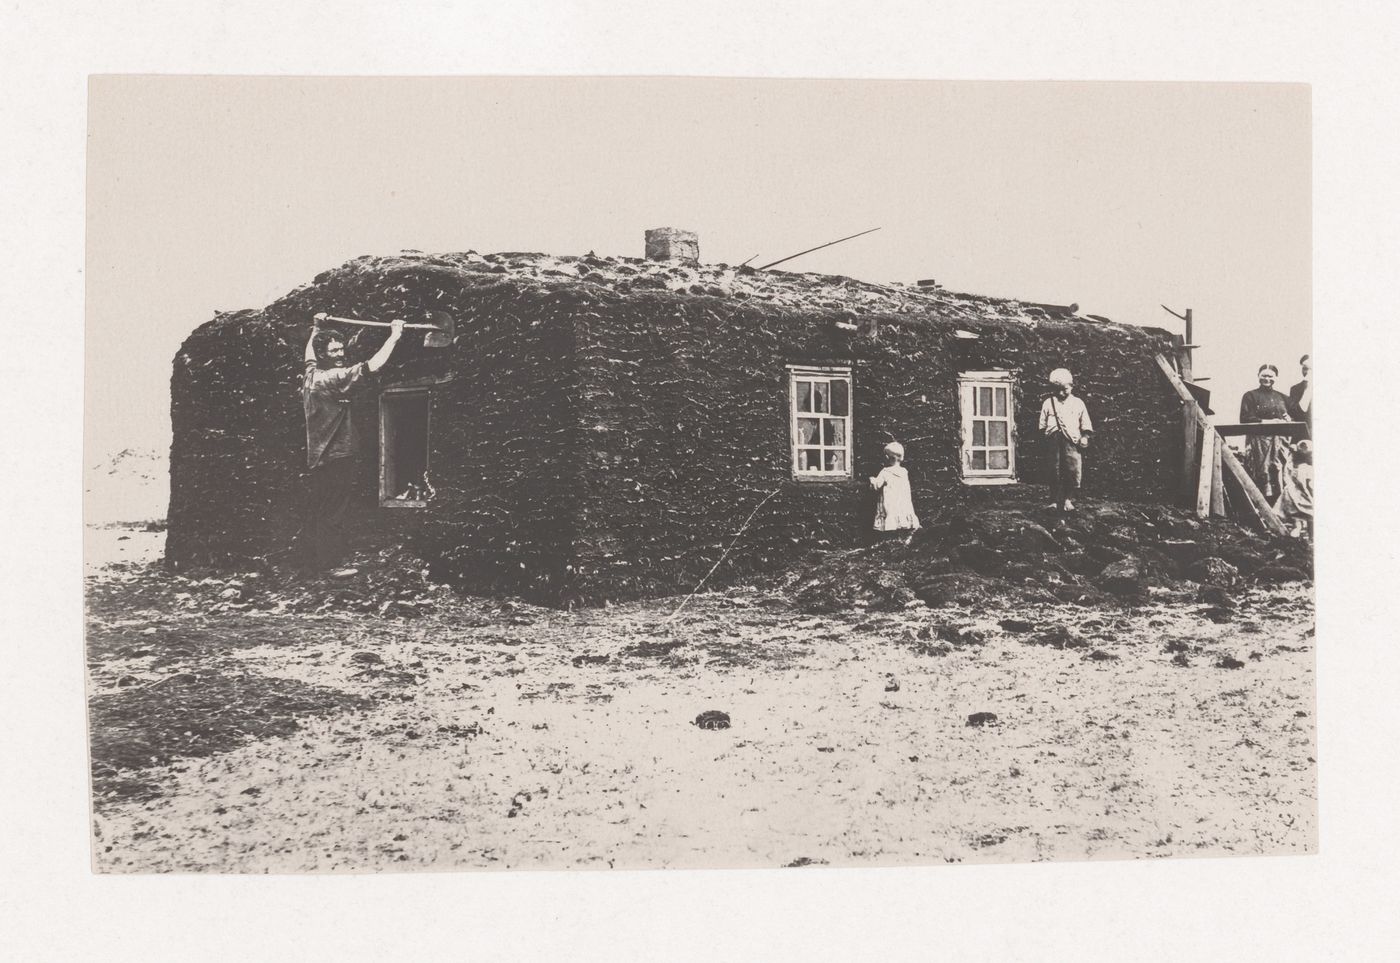 View of an earth-made house constructed by the first inhabitants of Magnitogorsk, Soviet Union (now in Russia)